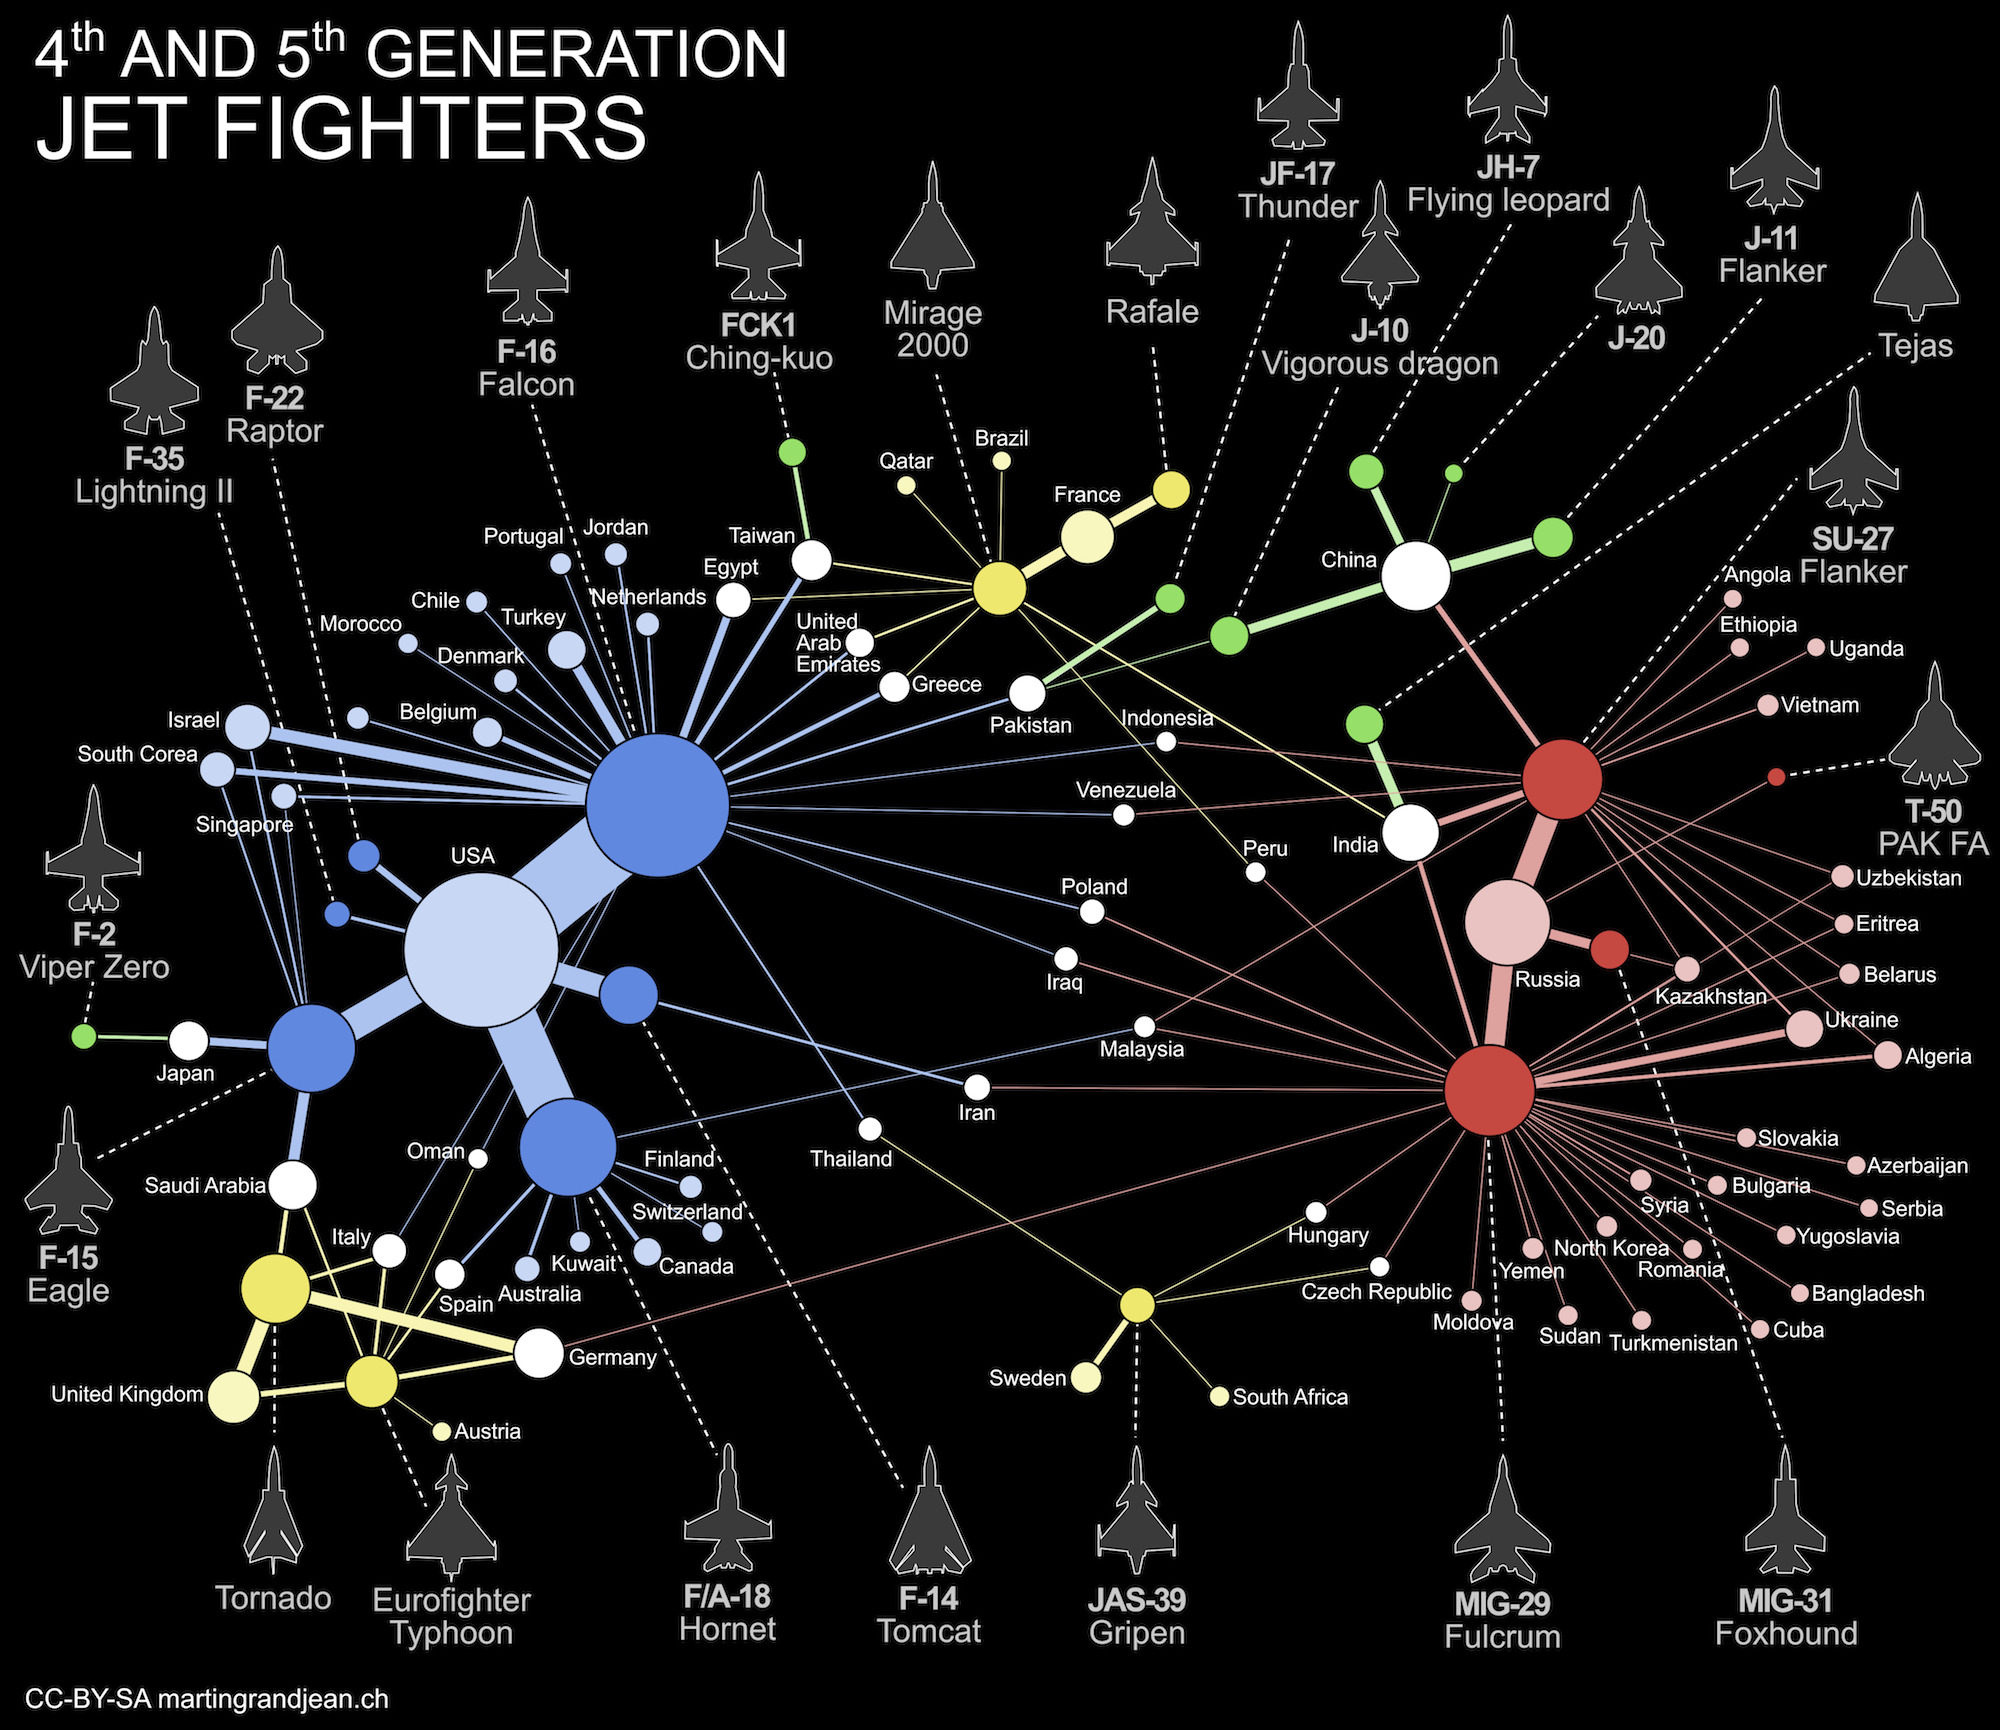 Data Visualization] Show me your jet fighters and I'll tell you